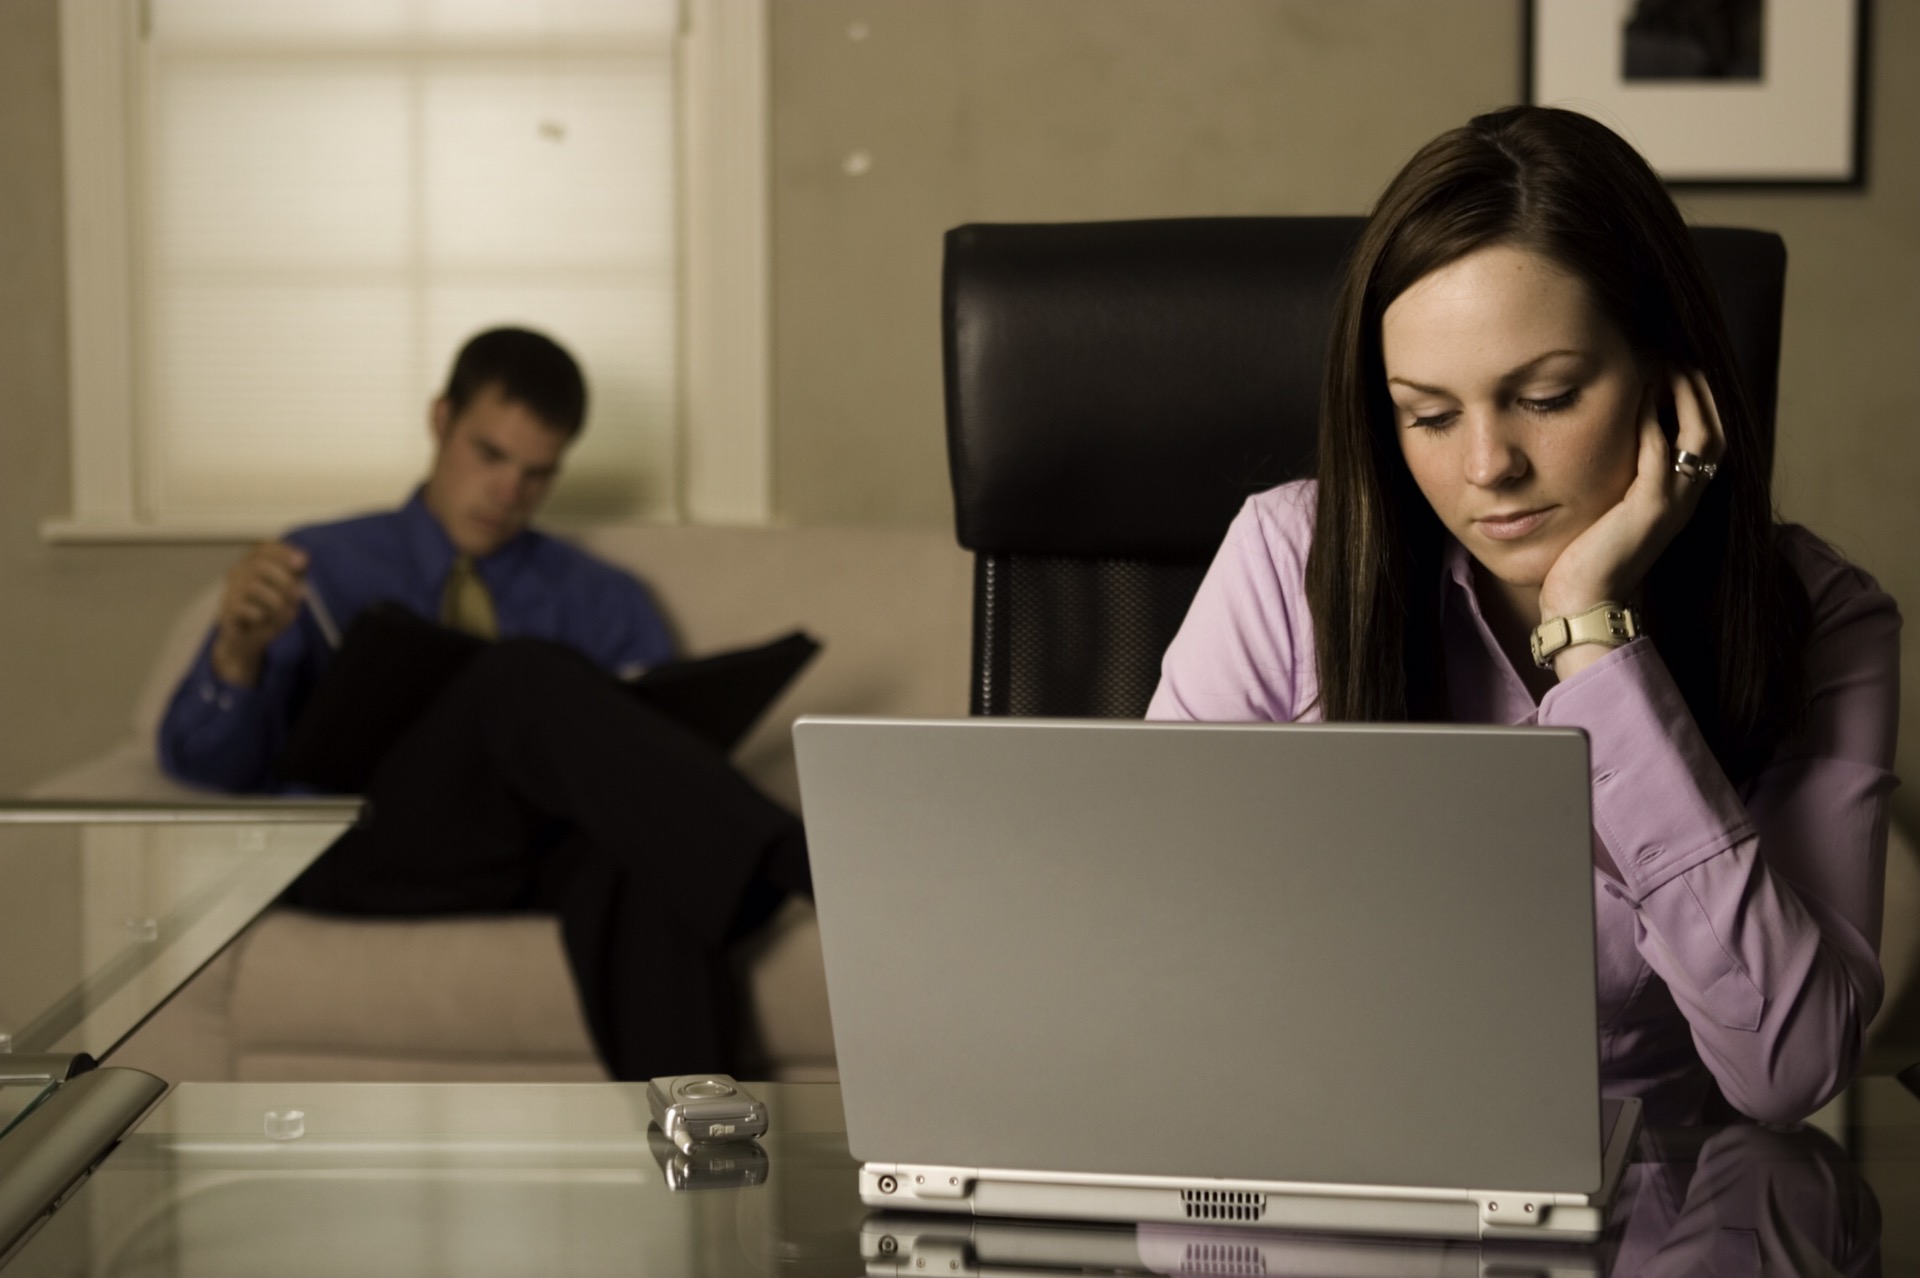 Is An Online Divorce The Right Choice For Me?